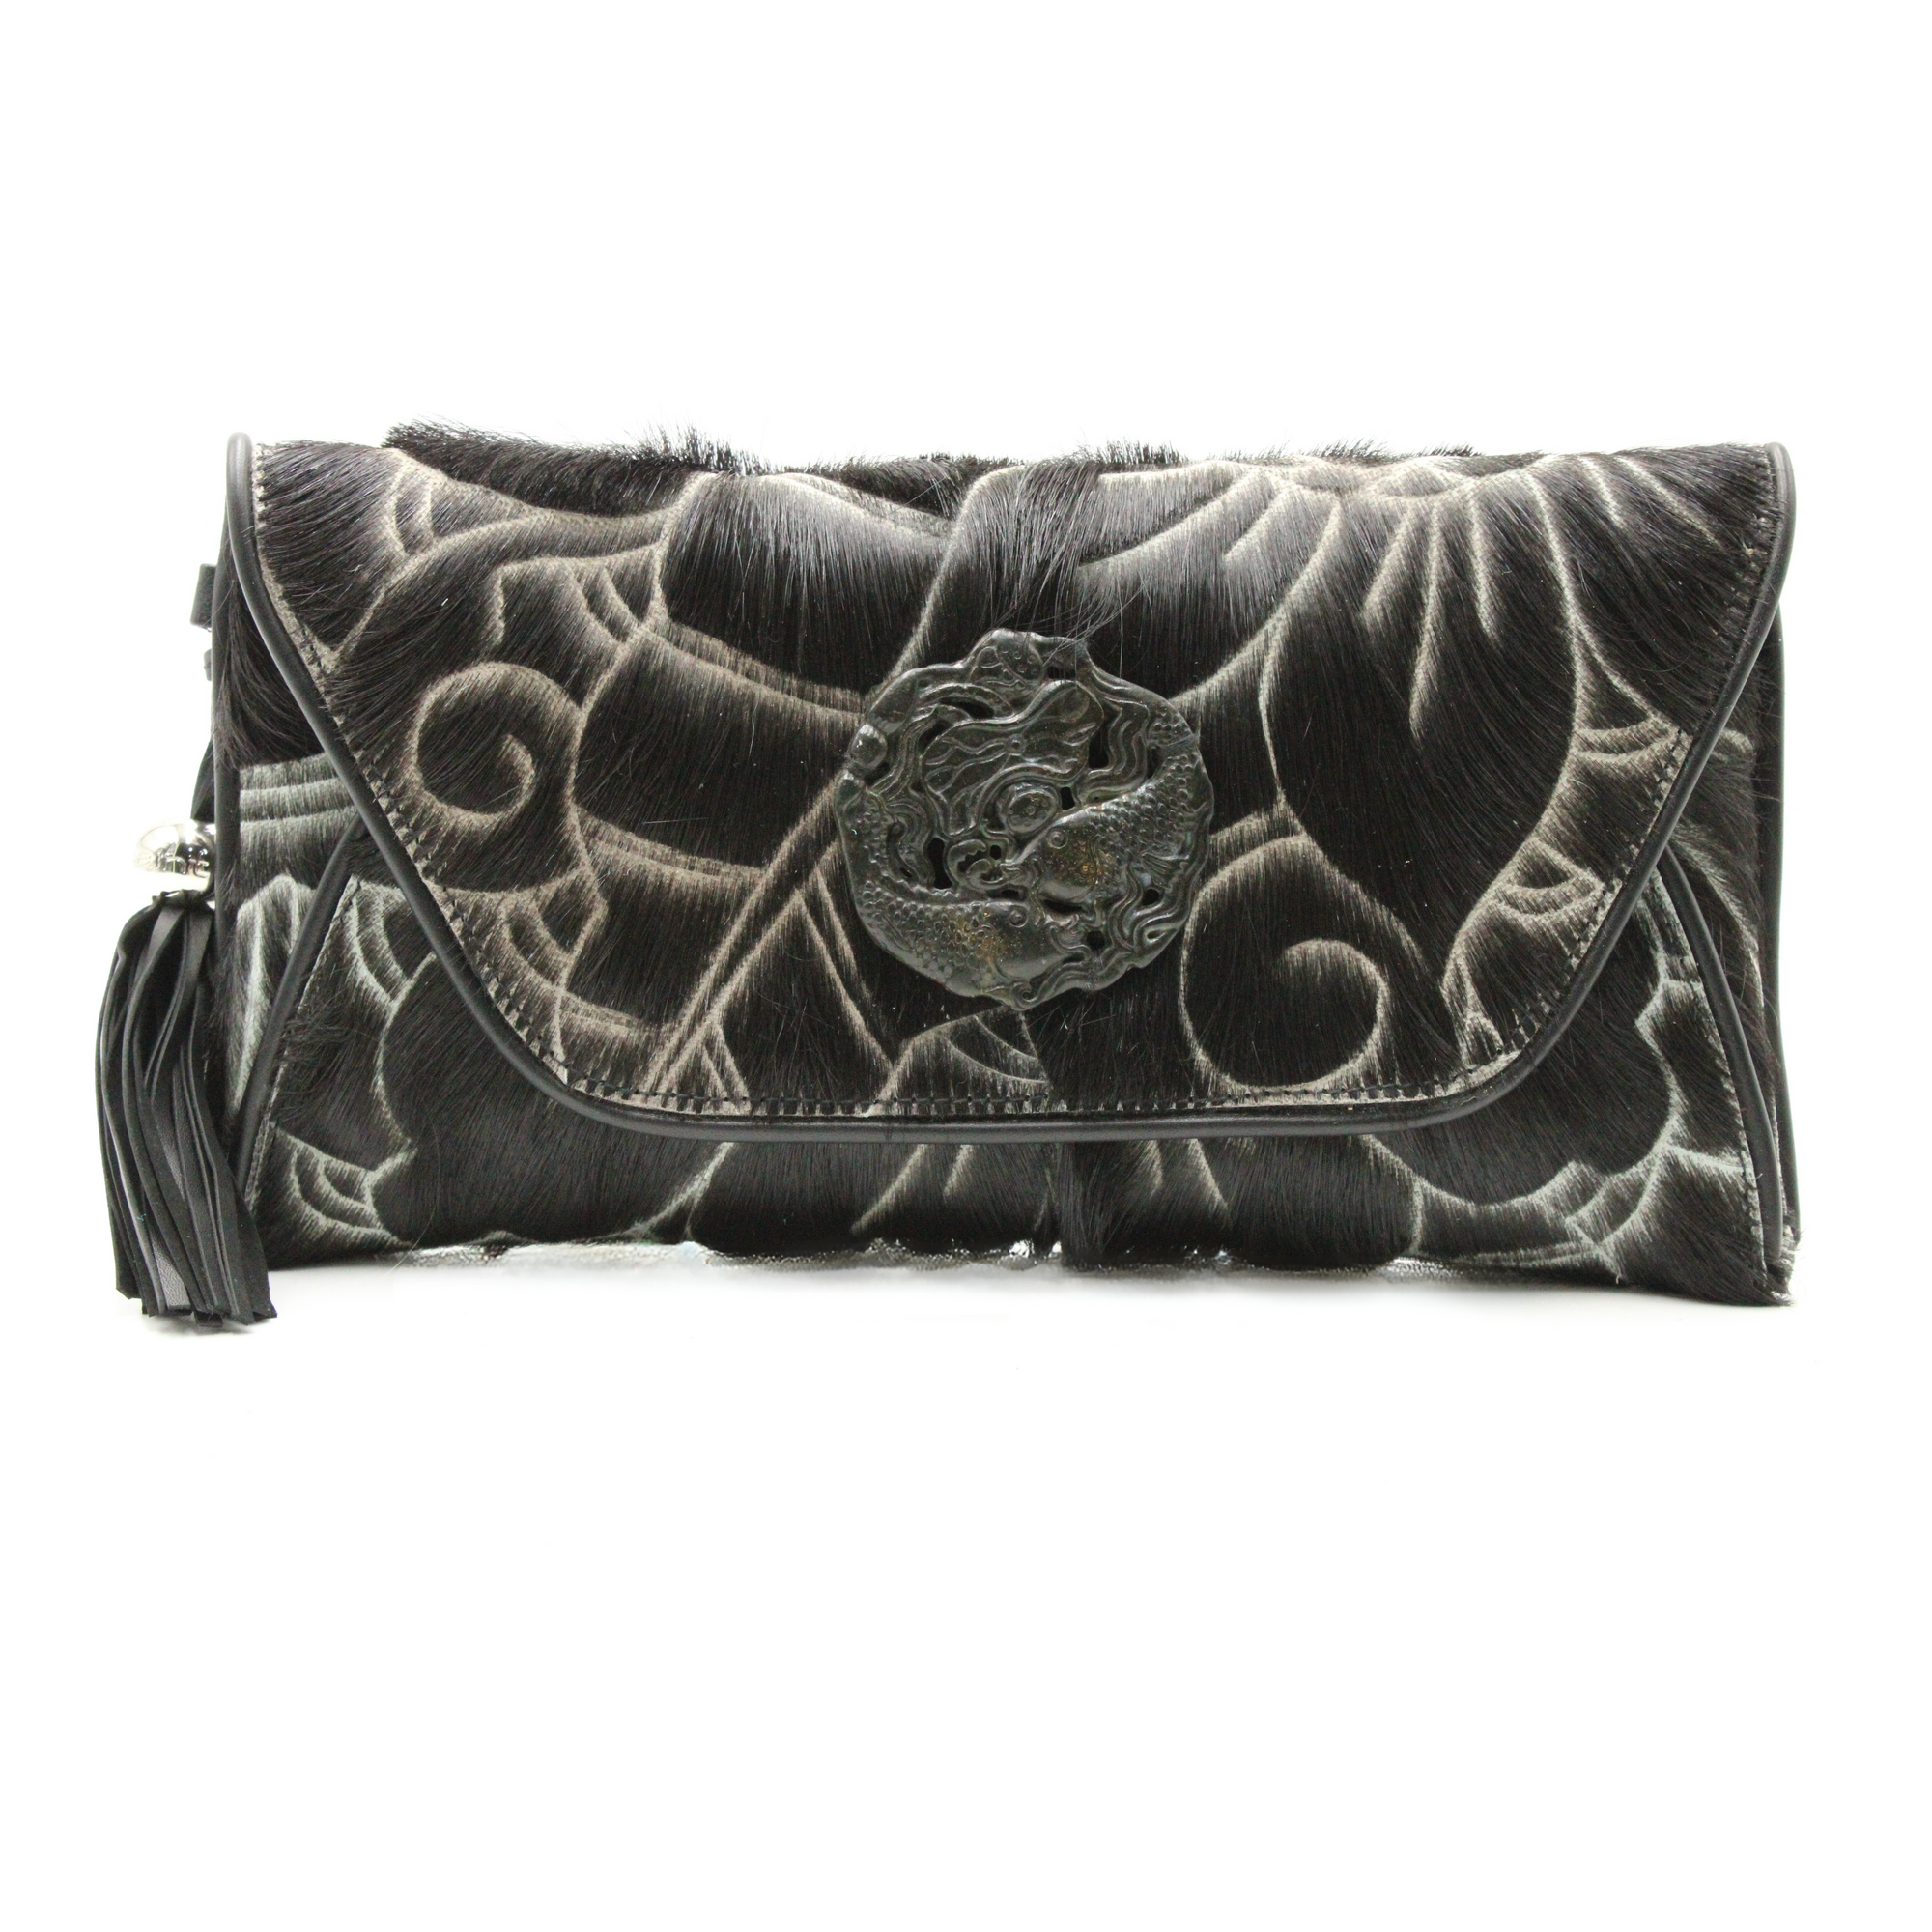 Black Hand Etched Envelope with Koi Jade Stone